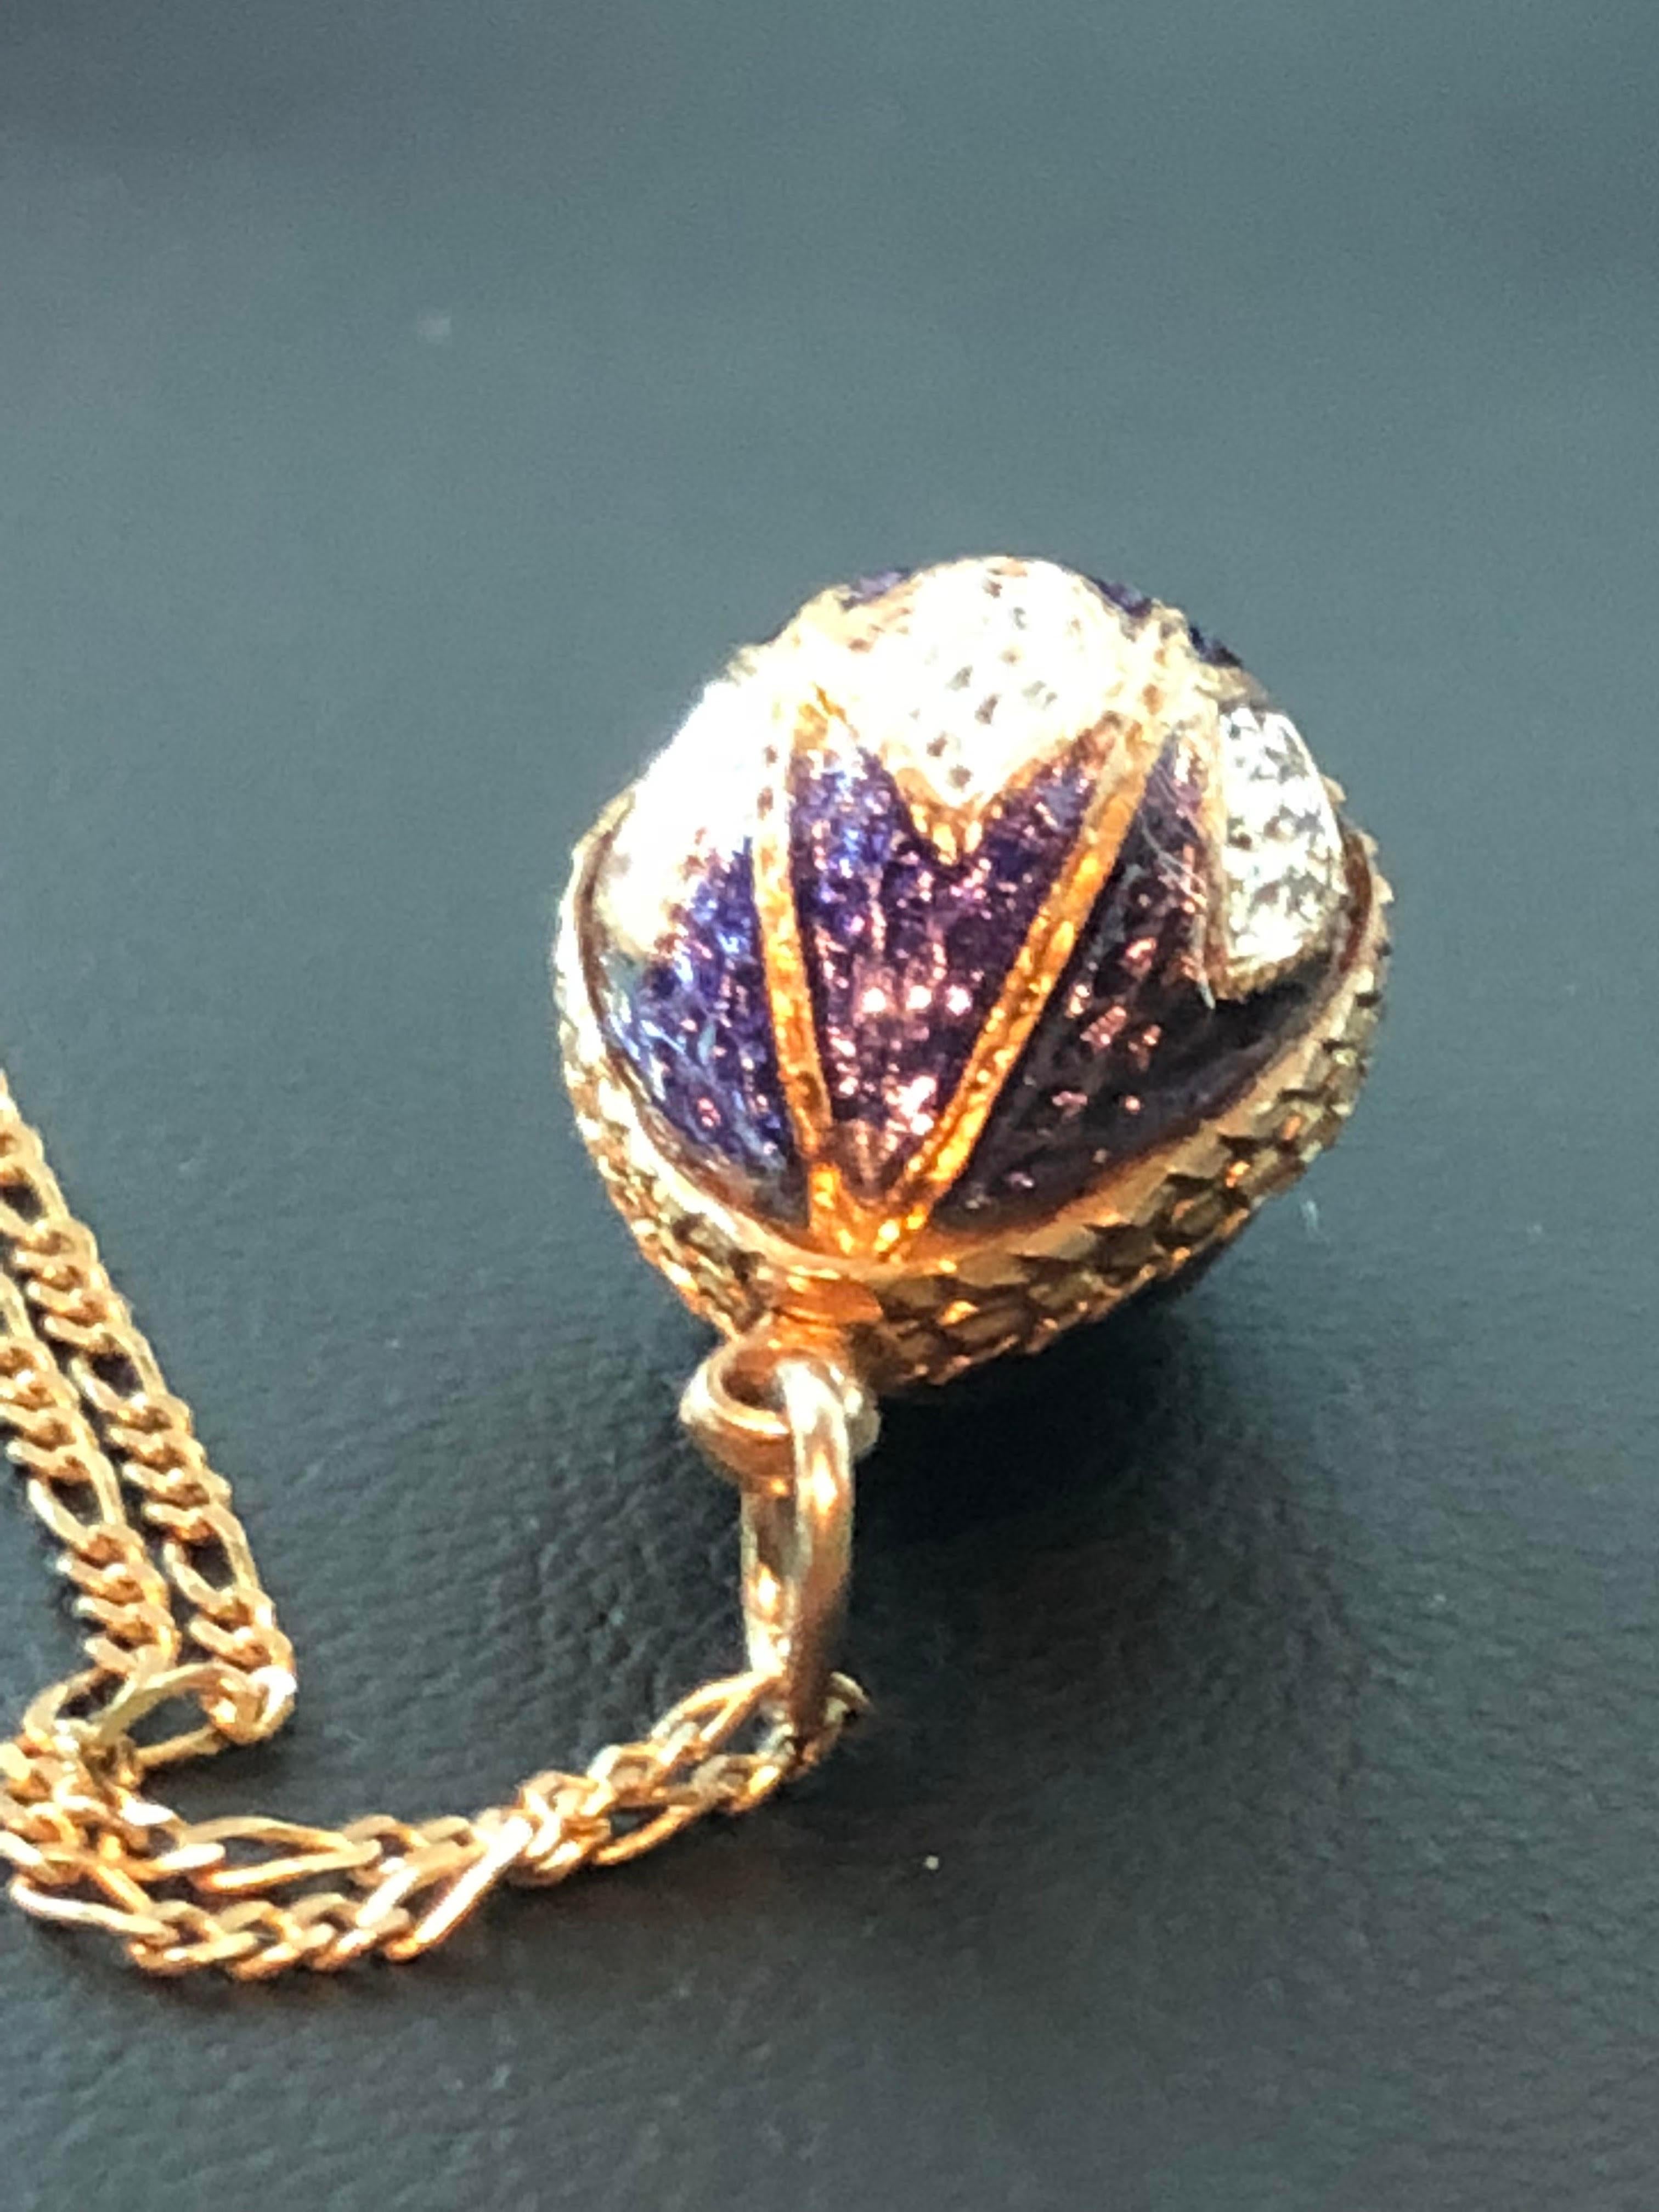 Antique Russian Sterling and 18k gold egg charm pendent guilloche purple, white enamel - red gem on the bottom.
There are two small spots with age on purple area. 

There are no markings or hallmarks

The gold has been tested and it tests to be 18k